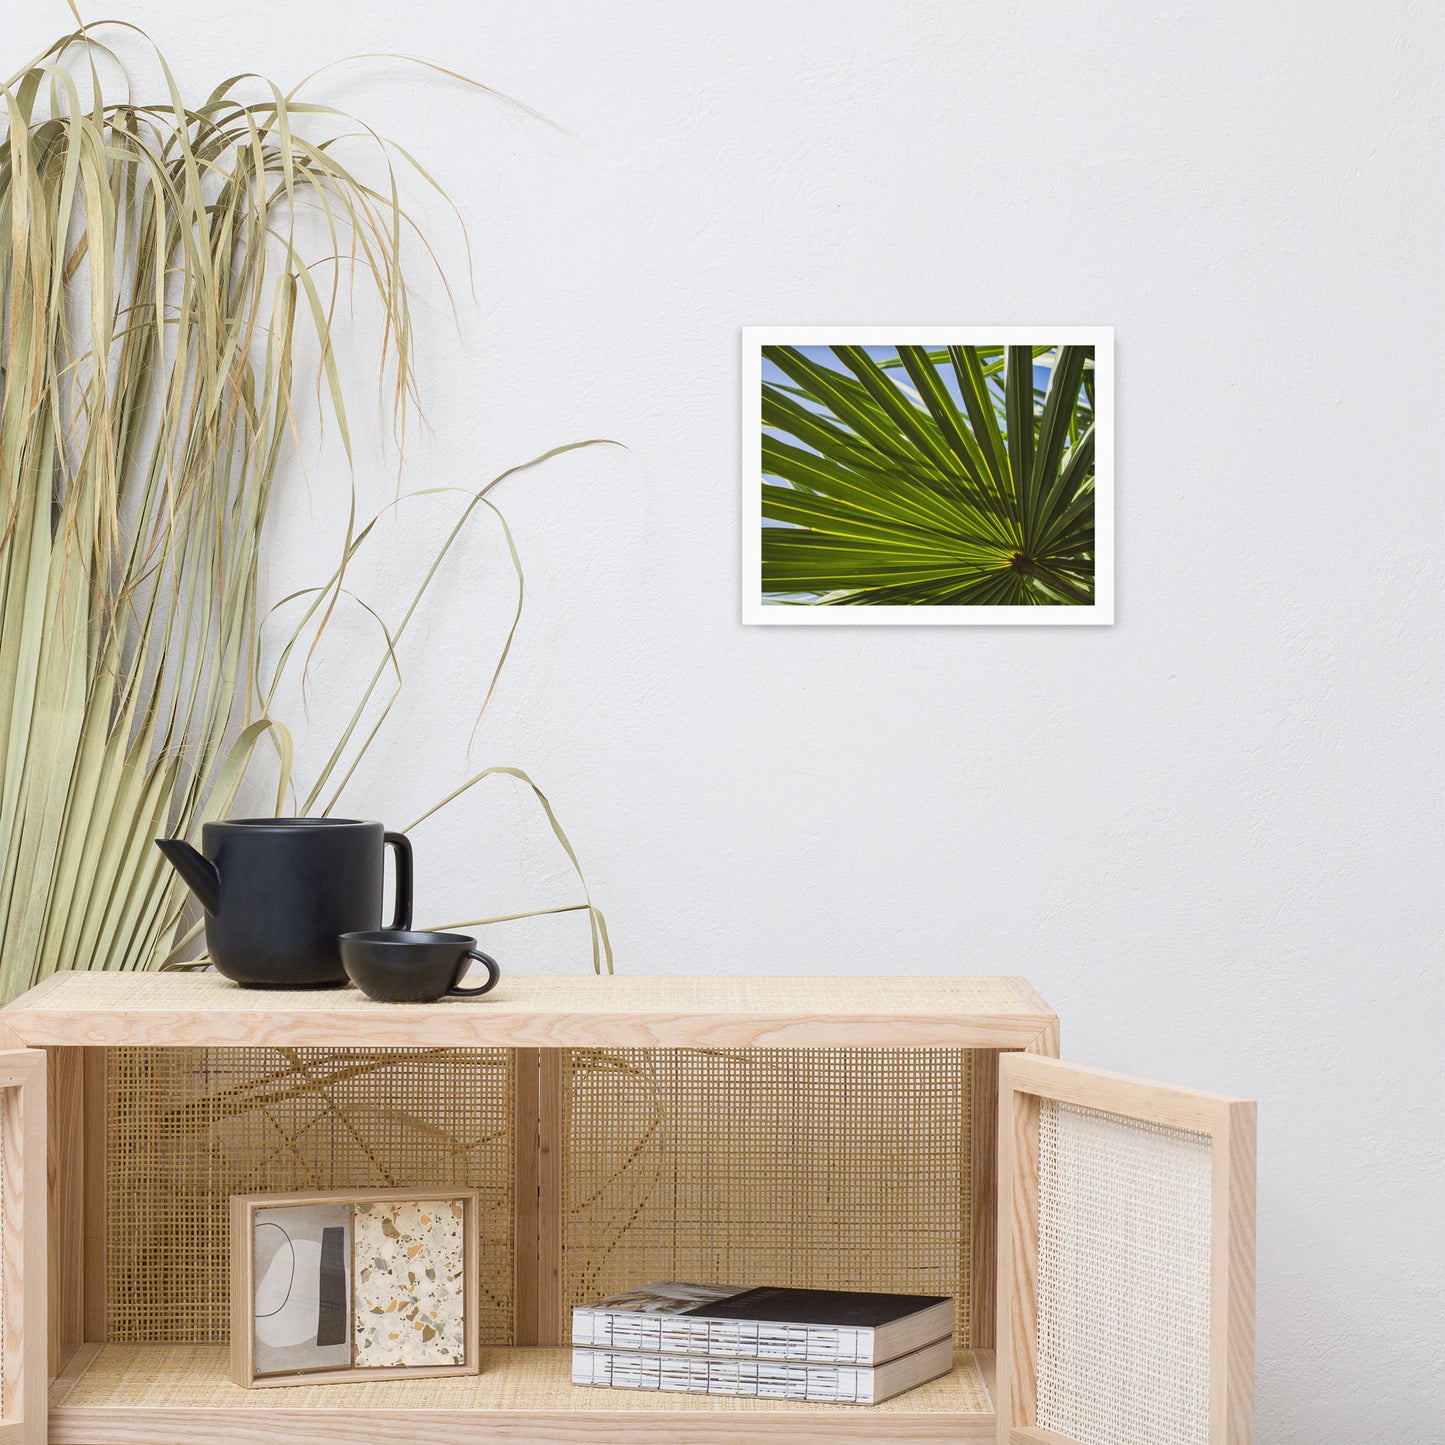 Colorized Wide Palm Leaves Botanical Nature Photo Framed Wall Art Print